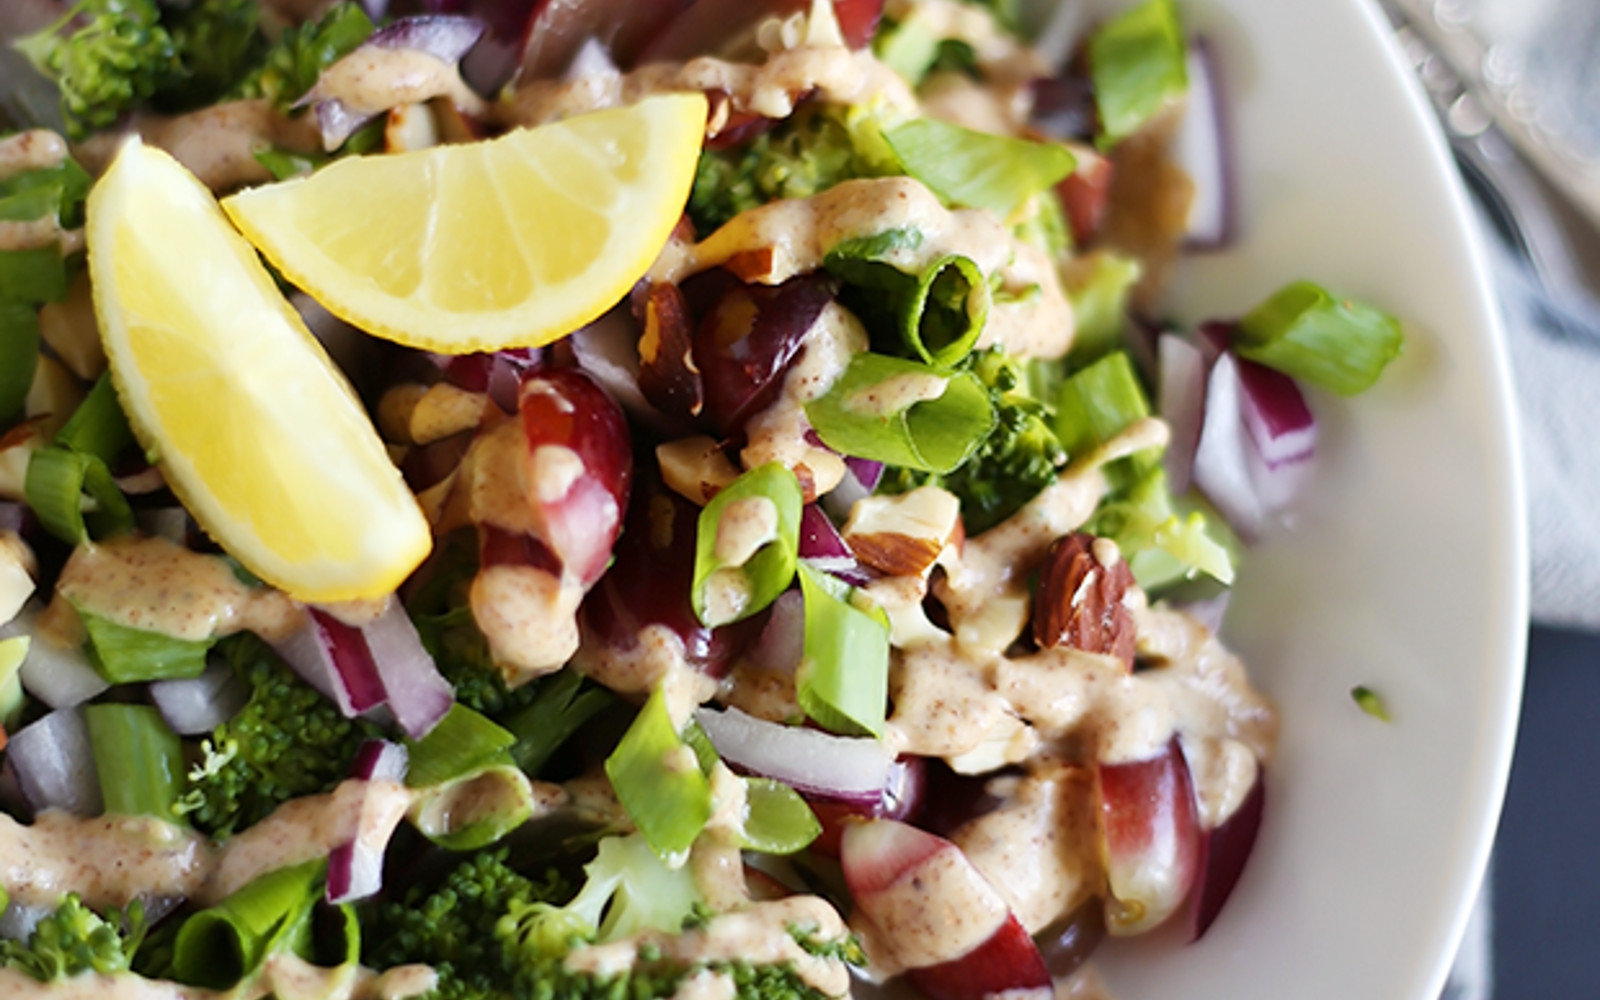 Vegan Gluten-Free Easy Broccoli Salad with almond lemon dressing topped with lemon wedges